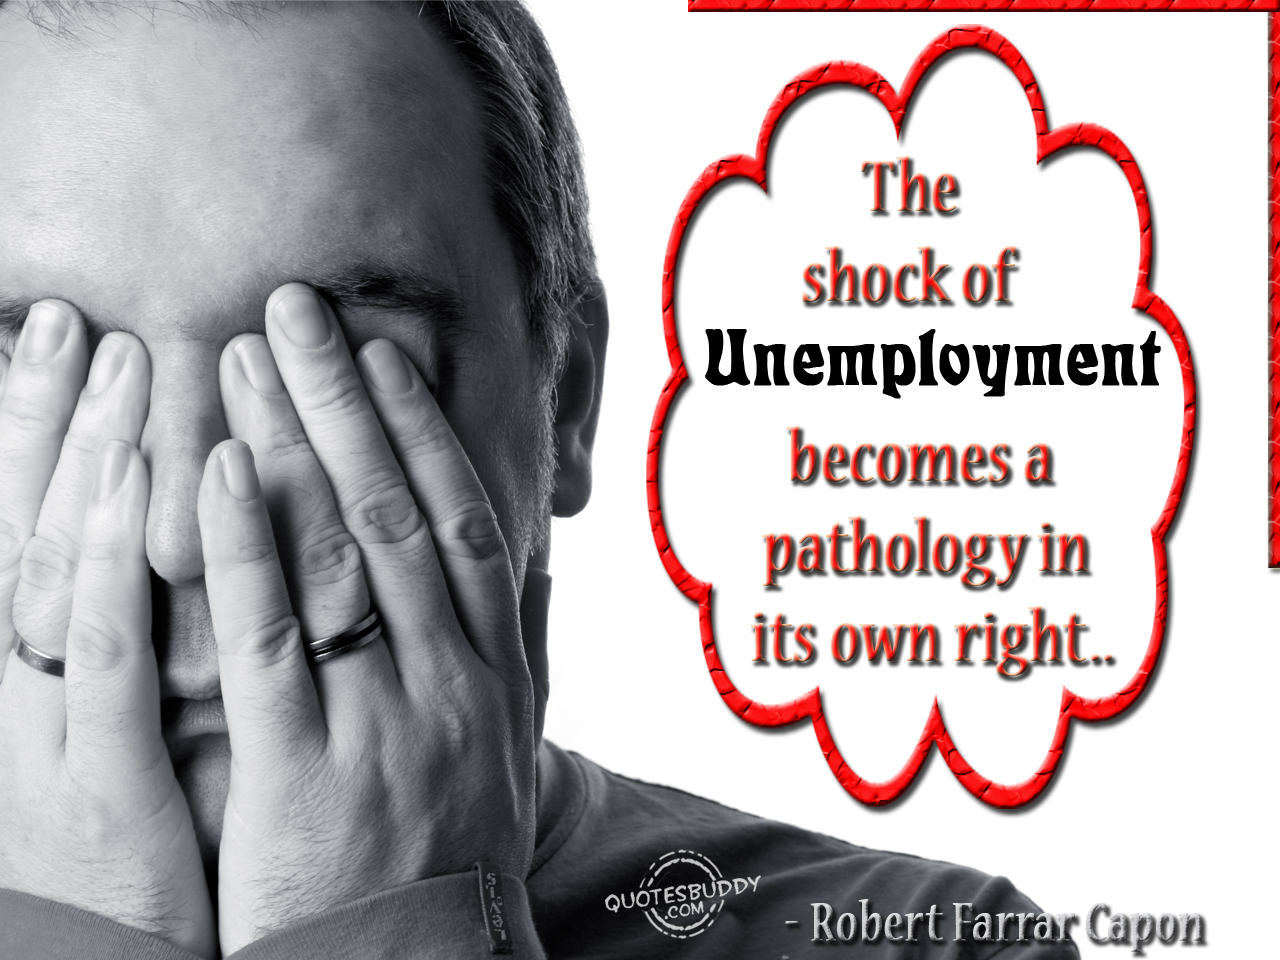 The shock of unemployment becomes a pathology in its own right - Robert Farrar Capon